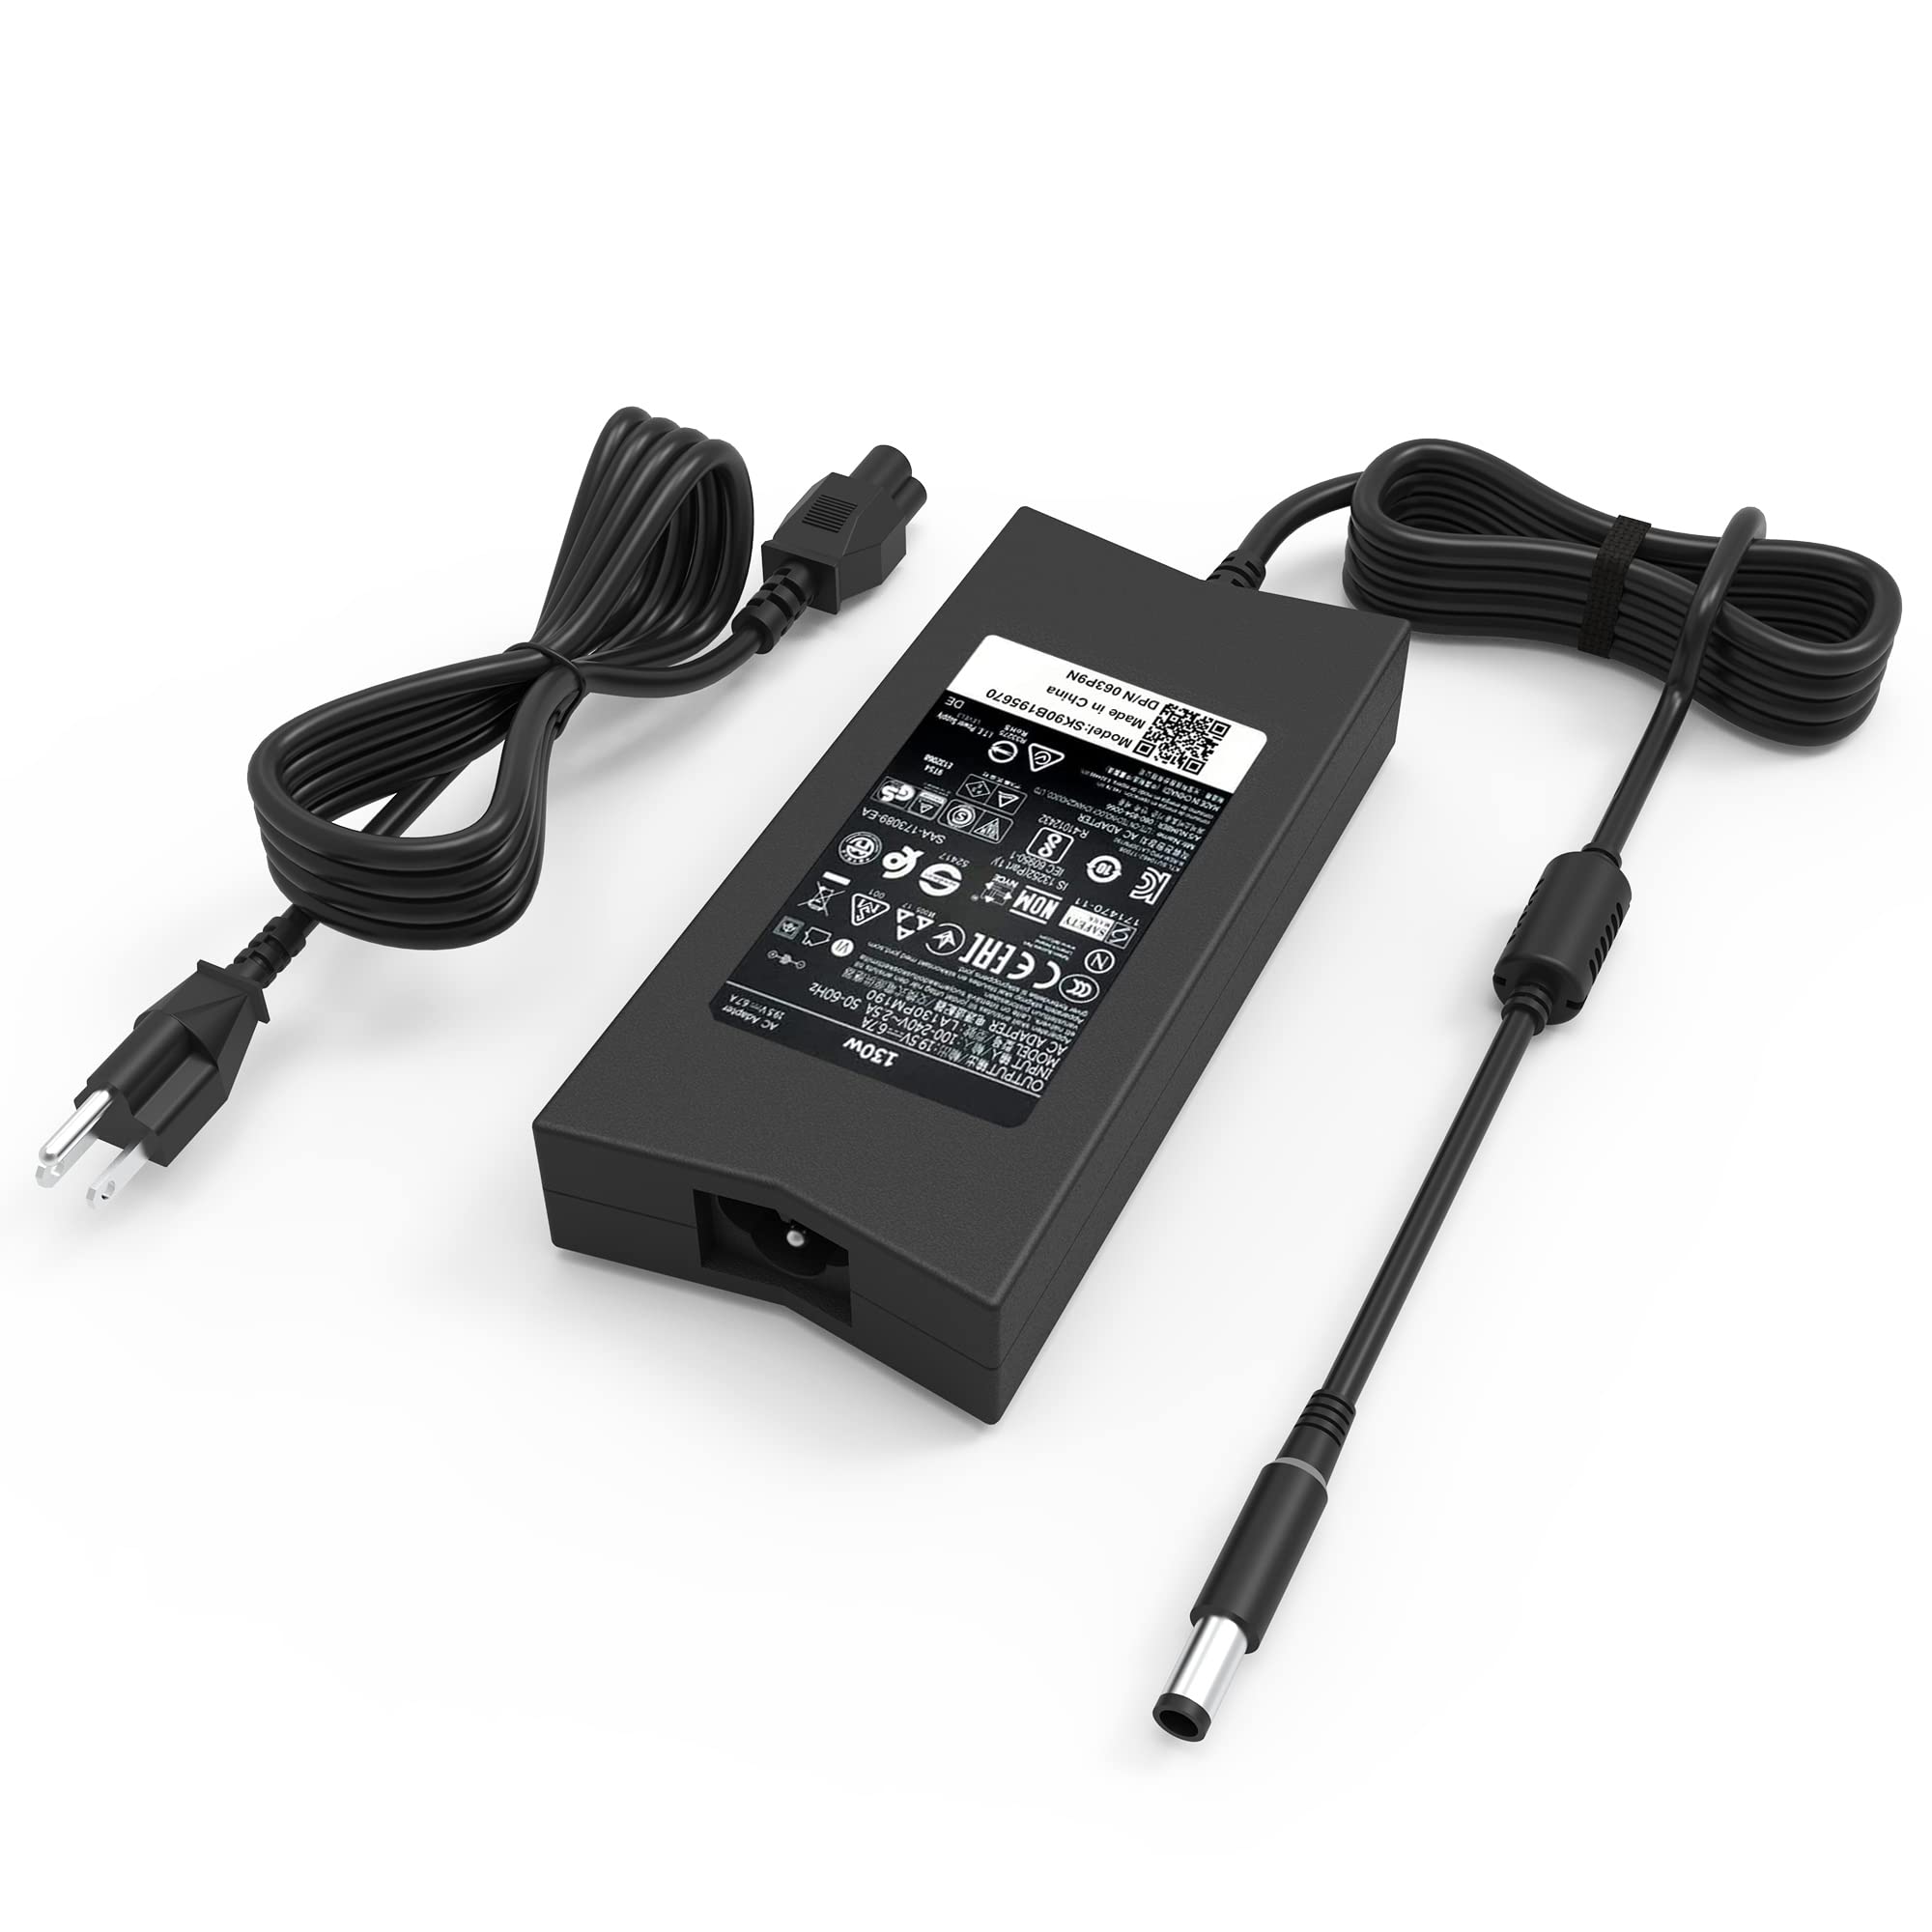 Mua Original Replacement New Dell 130W  Tip AC Adapter Charger for  PA-4E LA130PM121 DA130PE1-00 JU012 CM161 Dell Inspiron 15 7000 7559 Dell G3  G5 Charger dell d6000 Docking Station Laptop Power